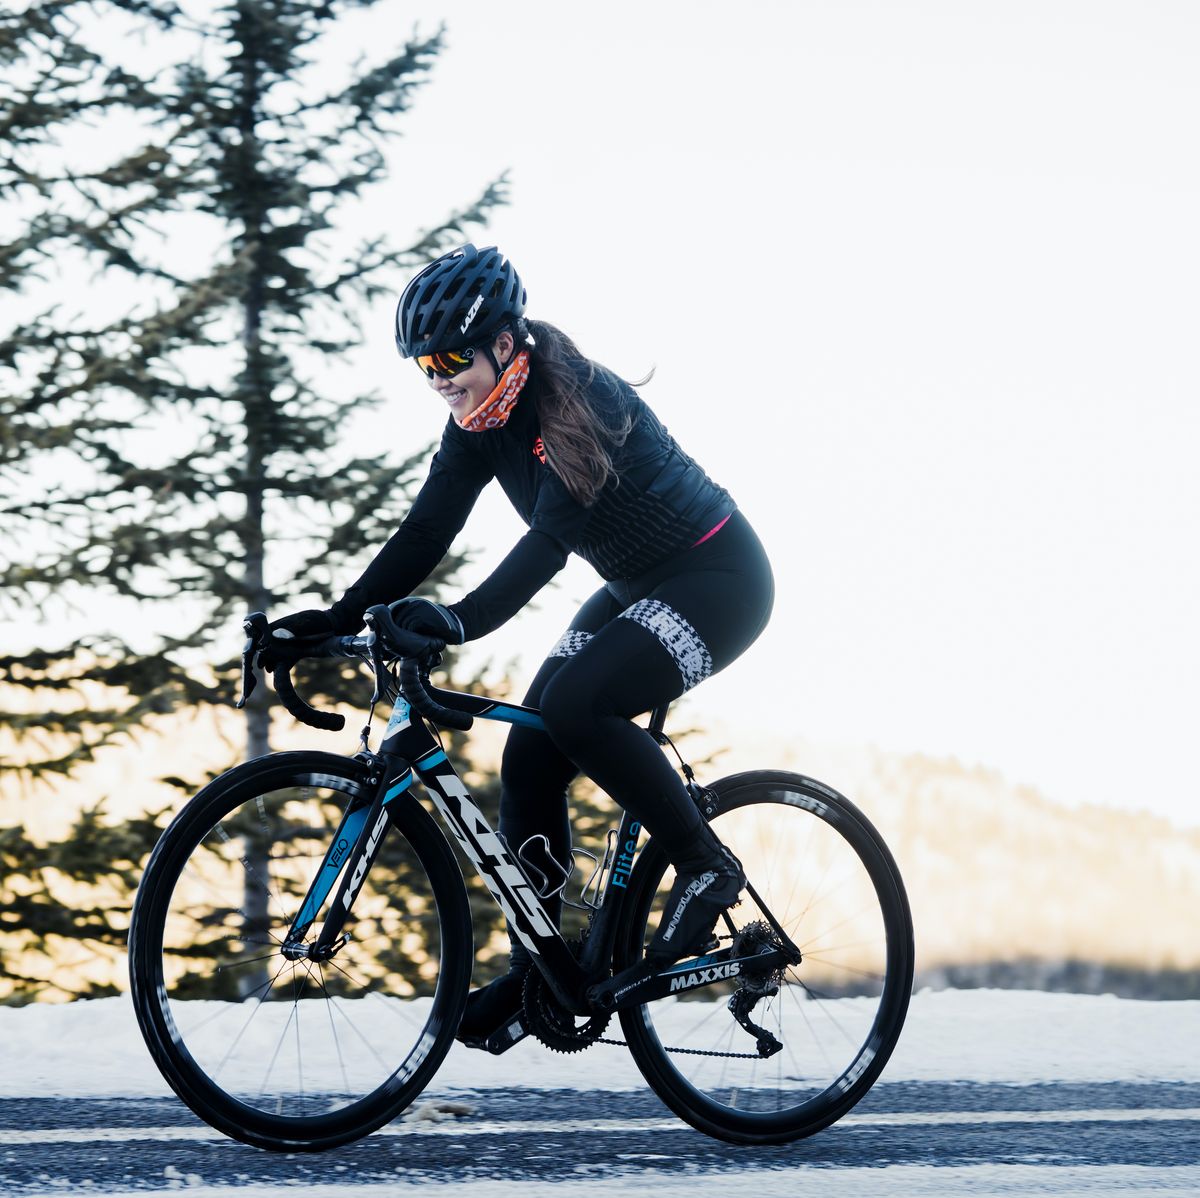 Winter Cycling Clothing Pro Tips - Cold Weather Clothing Guide 